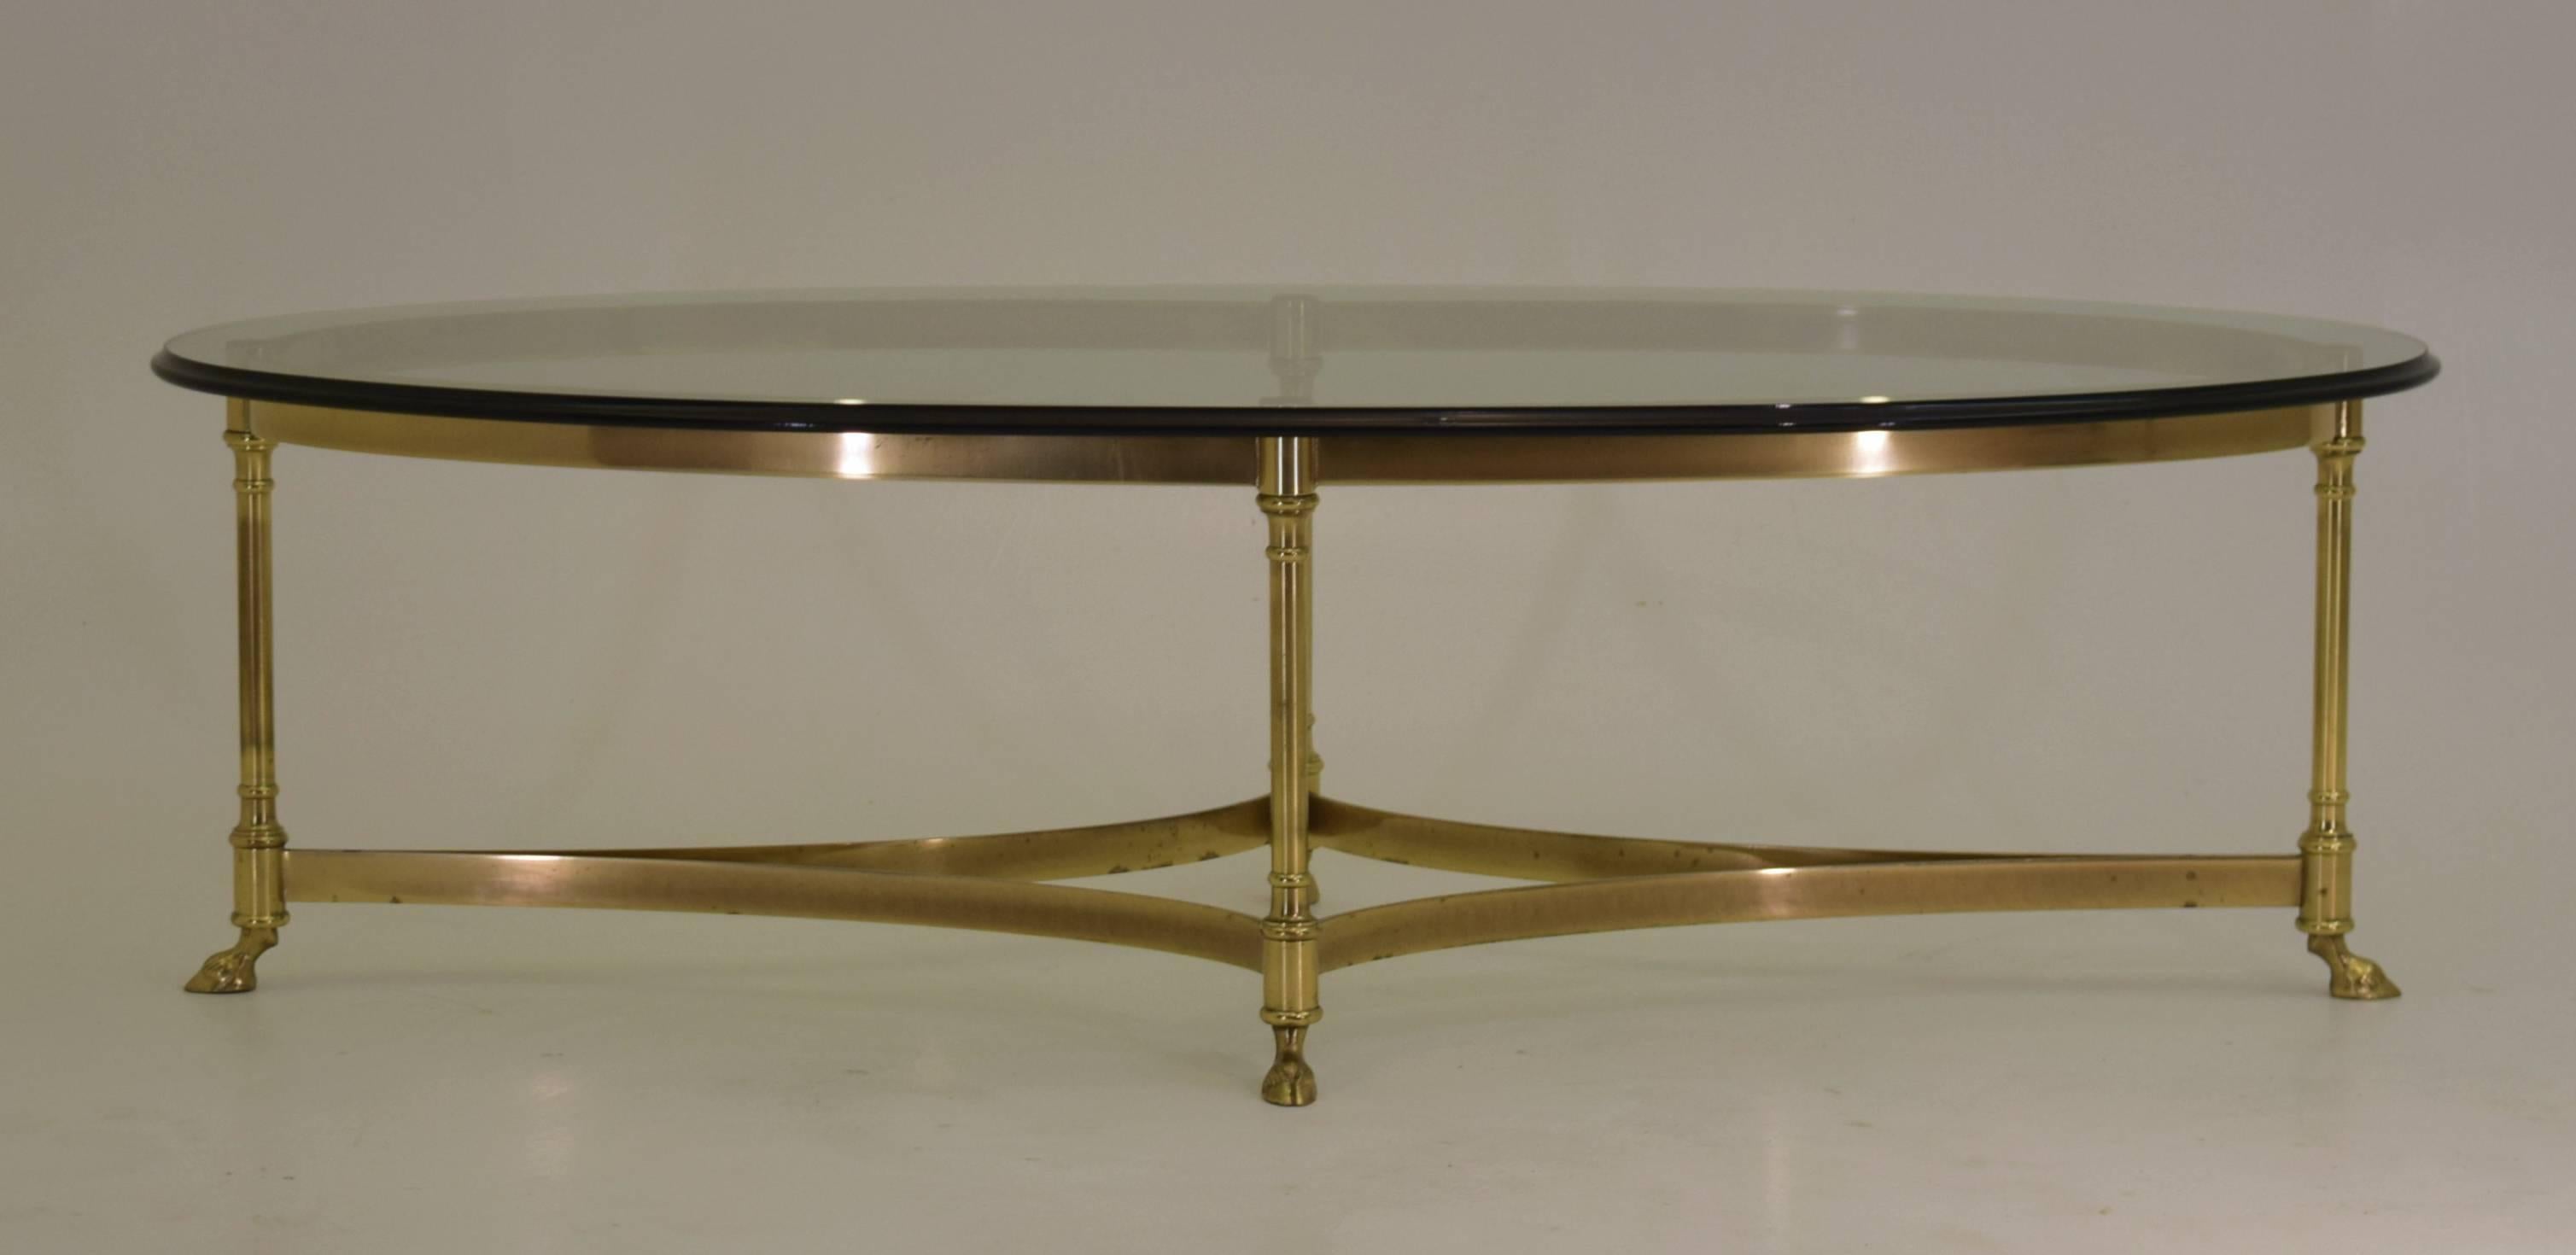 Labarge
USA, brass, glass circa 1970
Measure: 26 deep x 51.25 wide x 15 inches tall

Brass frame, with goat hoof feet - all in solid brass with bevelled thick ellipse glass table top. All original with the glass in impeccable condition.